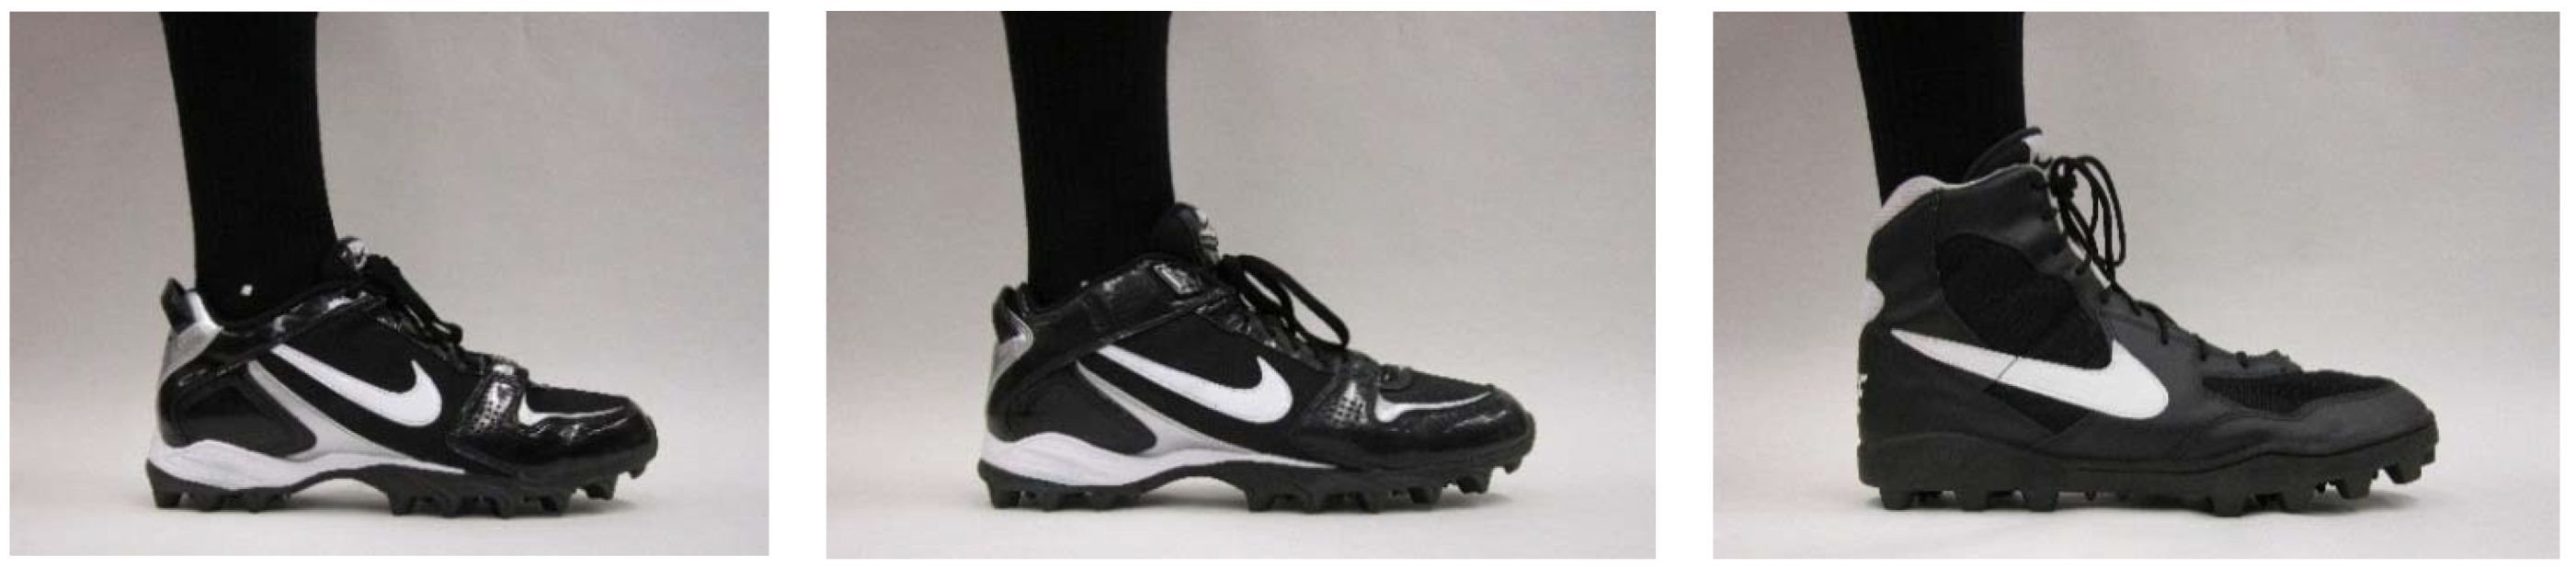 Sports | Free Full-Text | A Field Study of Low-Top vs. Mid-Top vs. High-Top  American Football Cleats